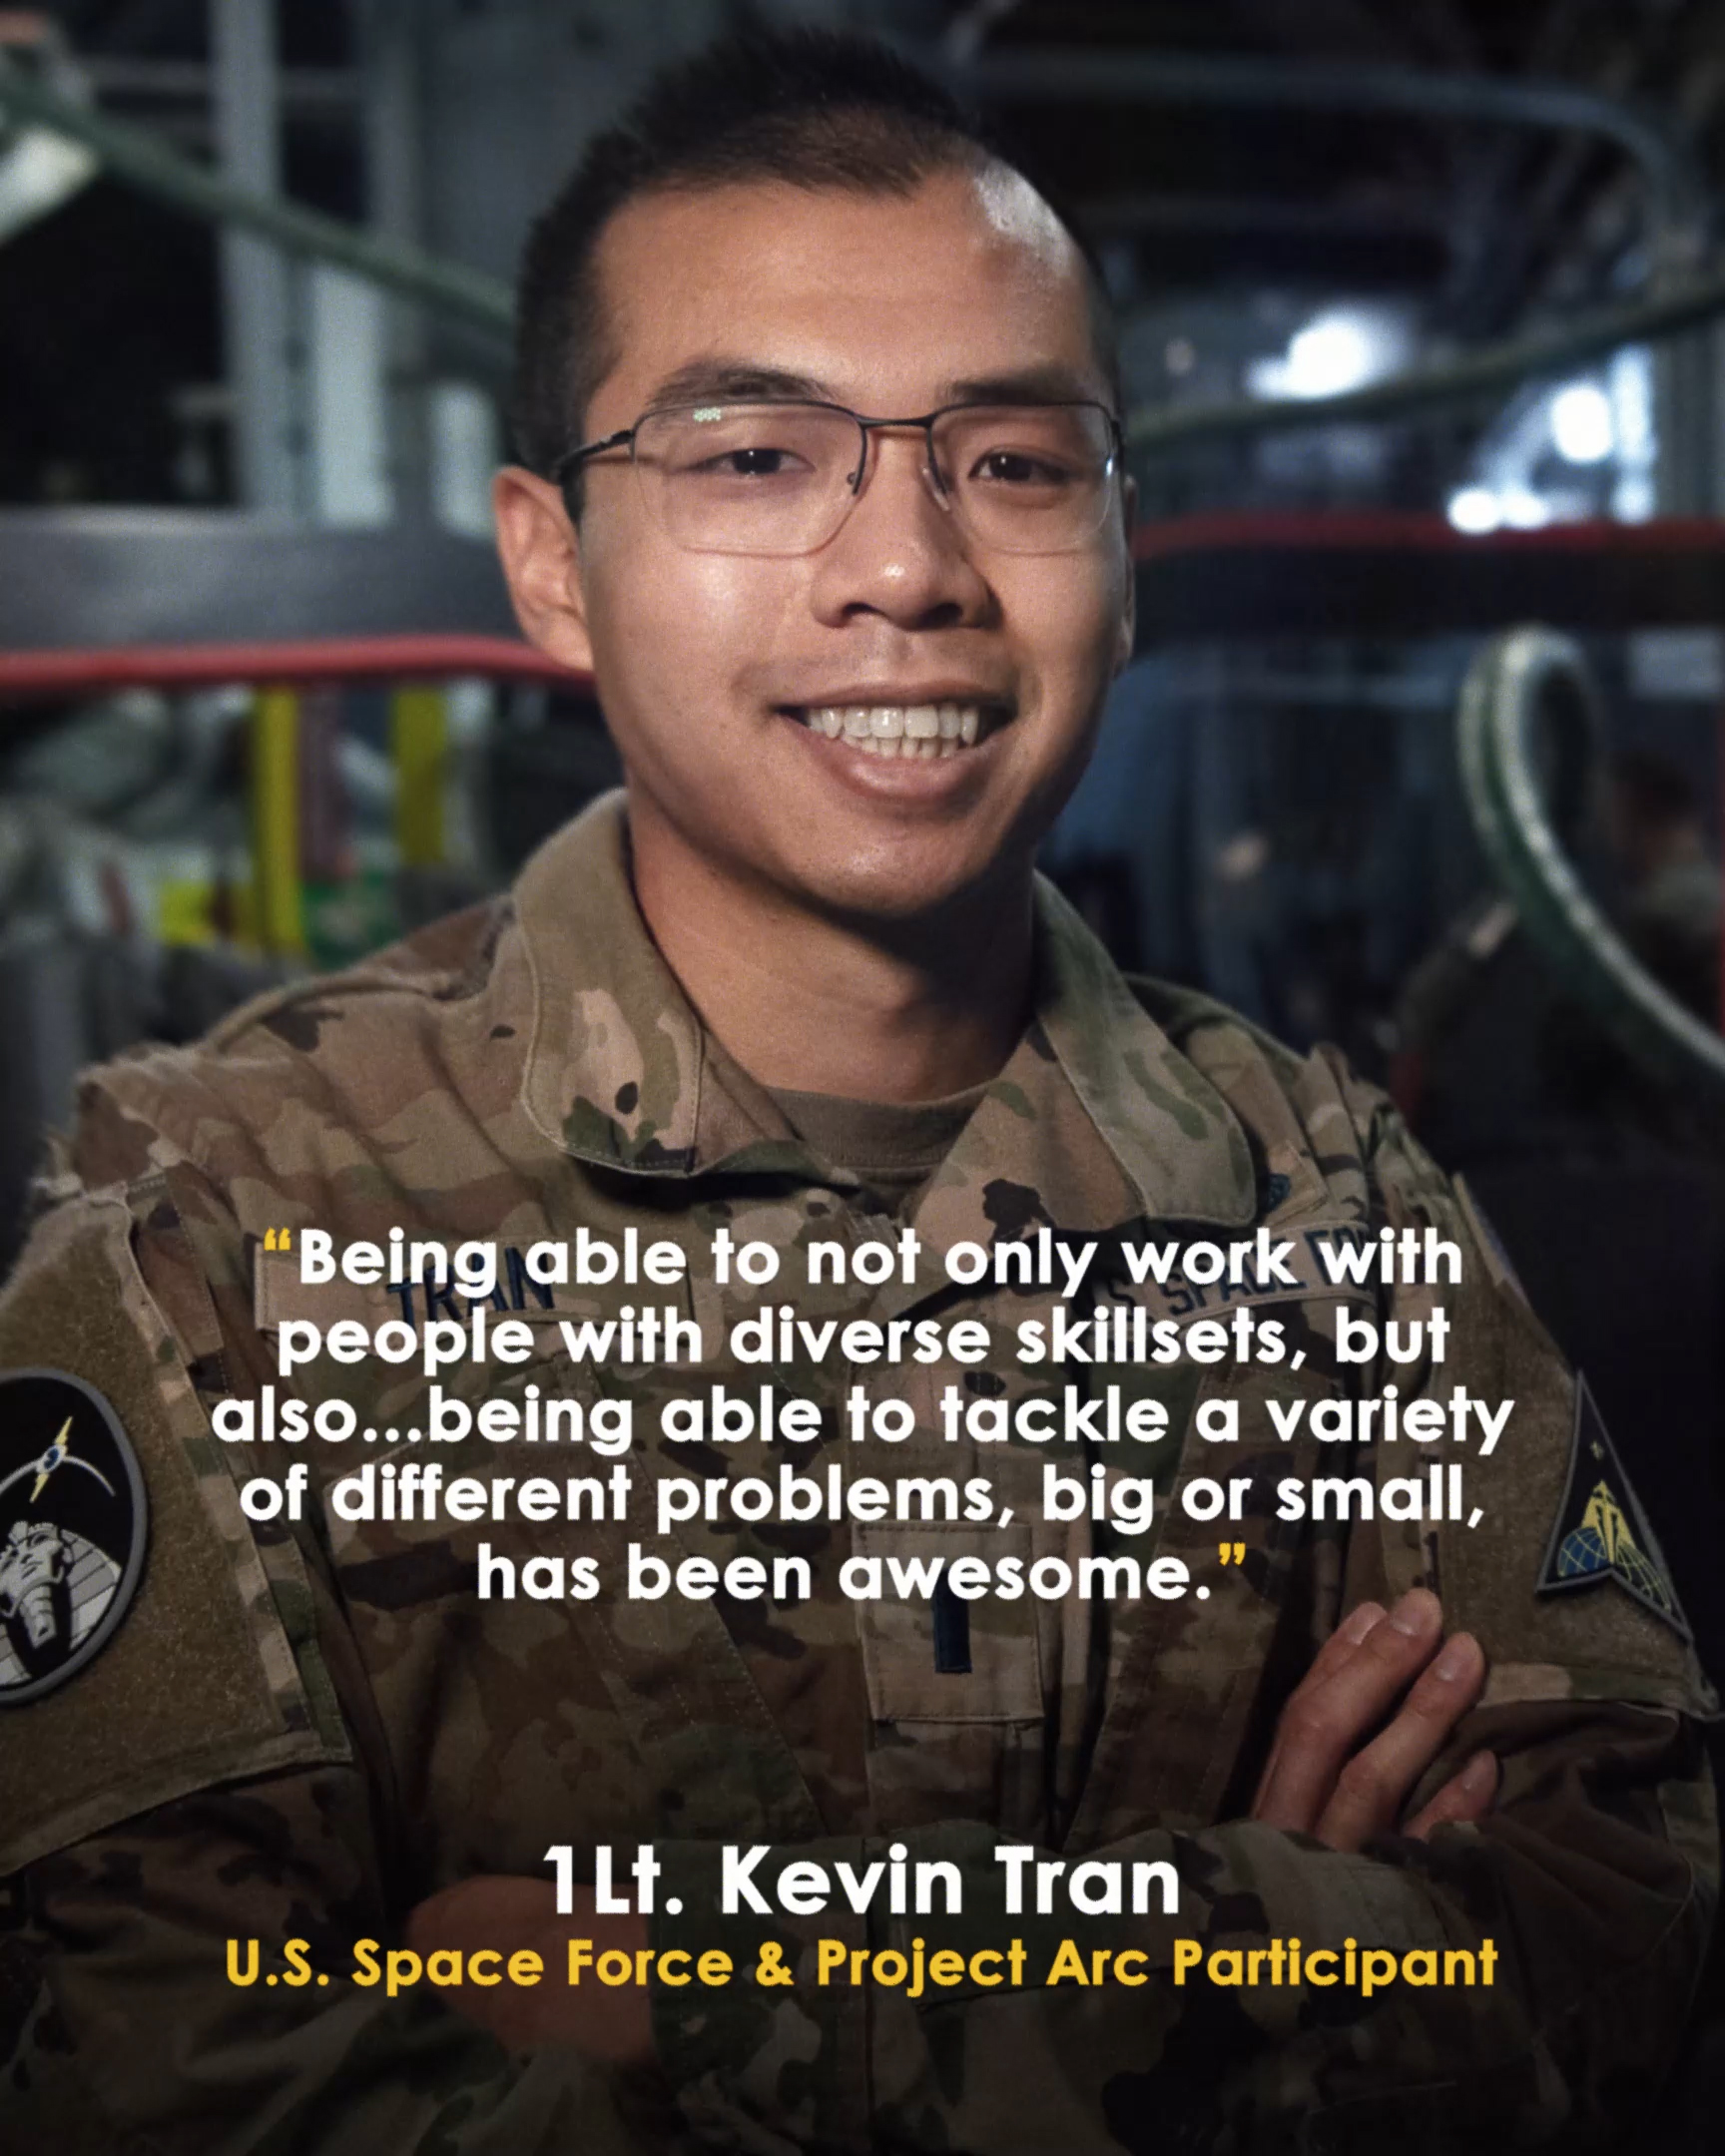 1Lt. Kevin Tran, U.S. Space Force & Project Arc Engineer